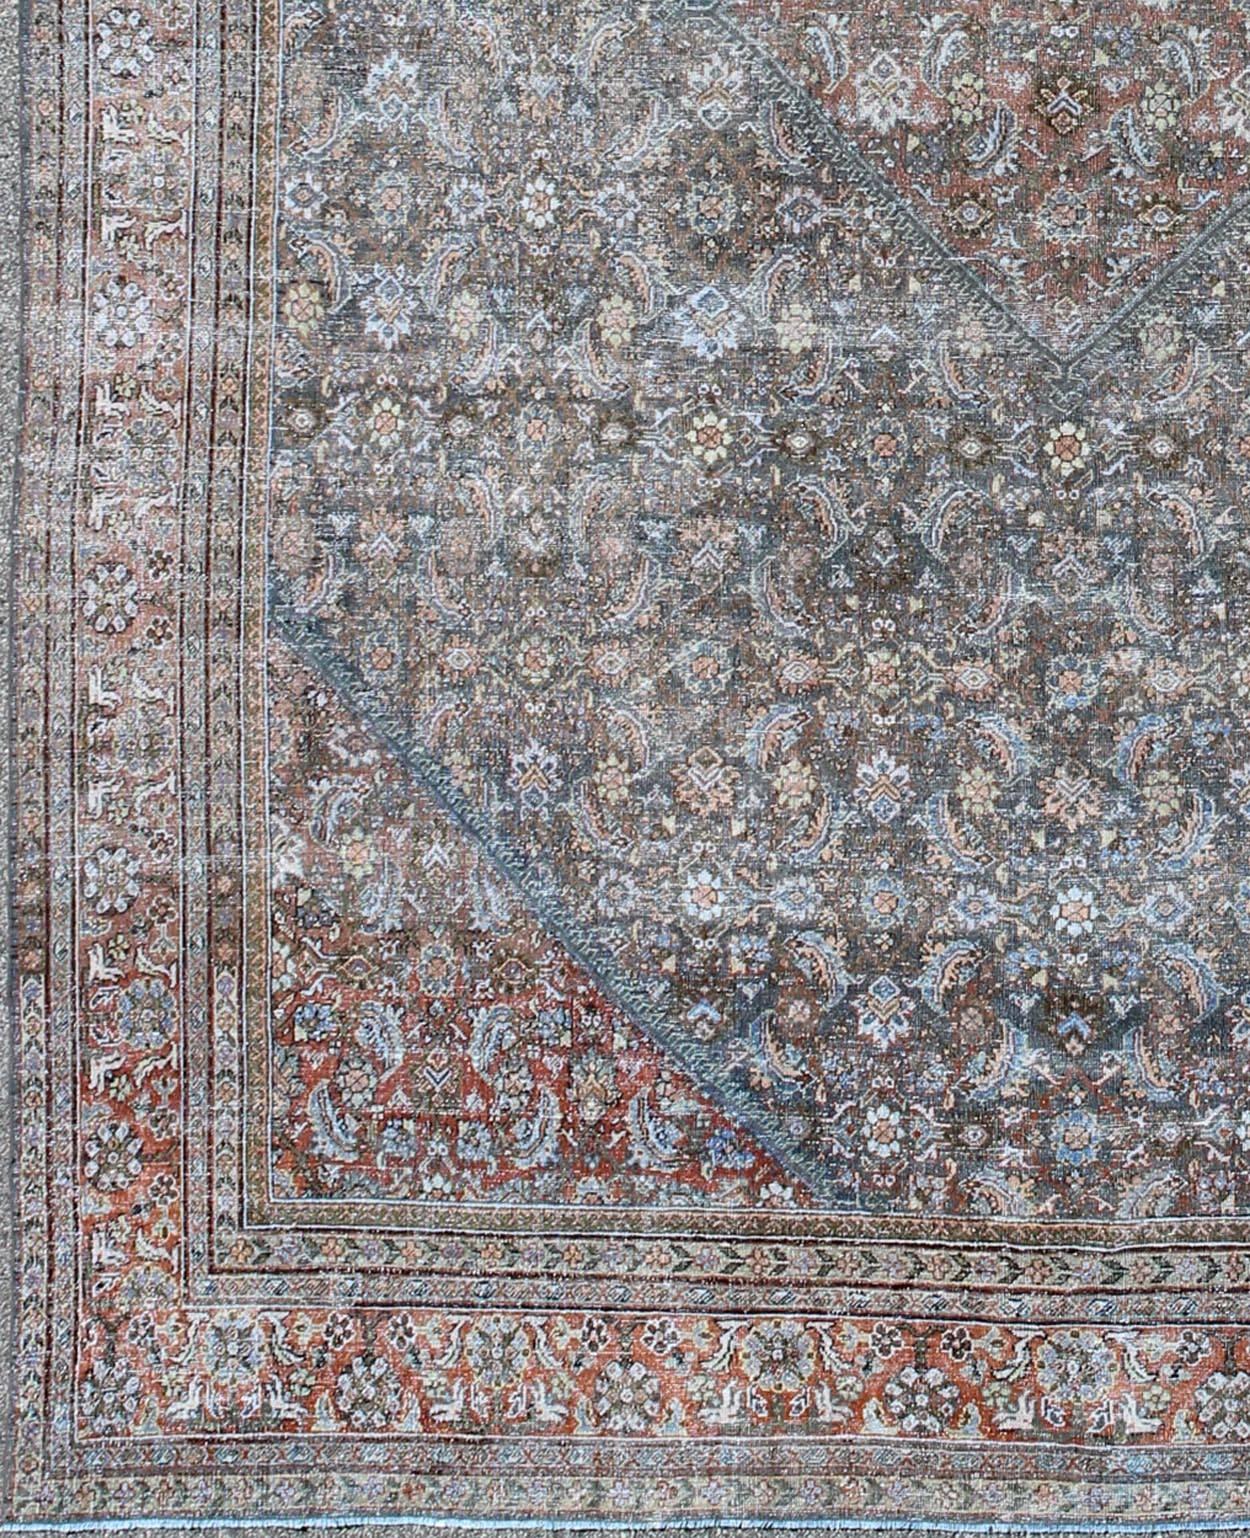  Large Antique Persian Sultanabad Mahal rug with sub Geometric All Over design in variegated Gray Green background and coral border. Keivan Woven Arts / rug SUS-1803-220, country of origin / type: Iran / Sultanabad, circa 1910.
Measures: 12'1 x